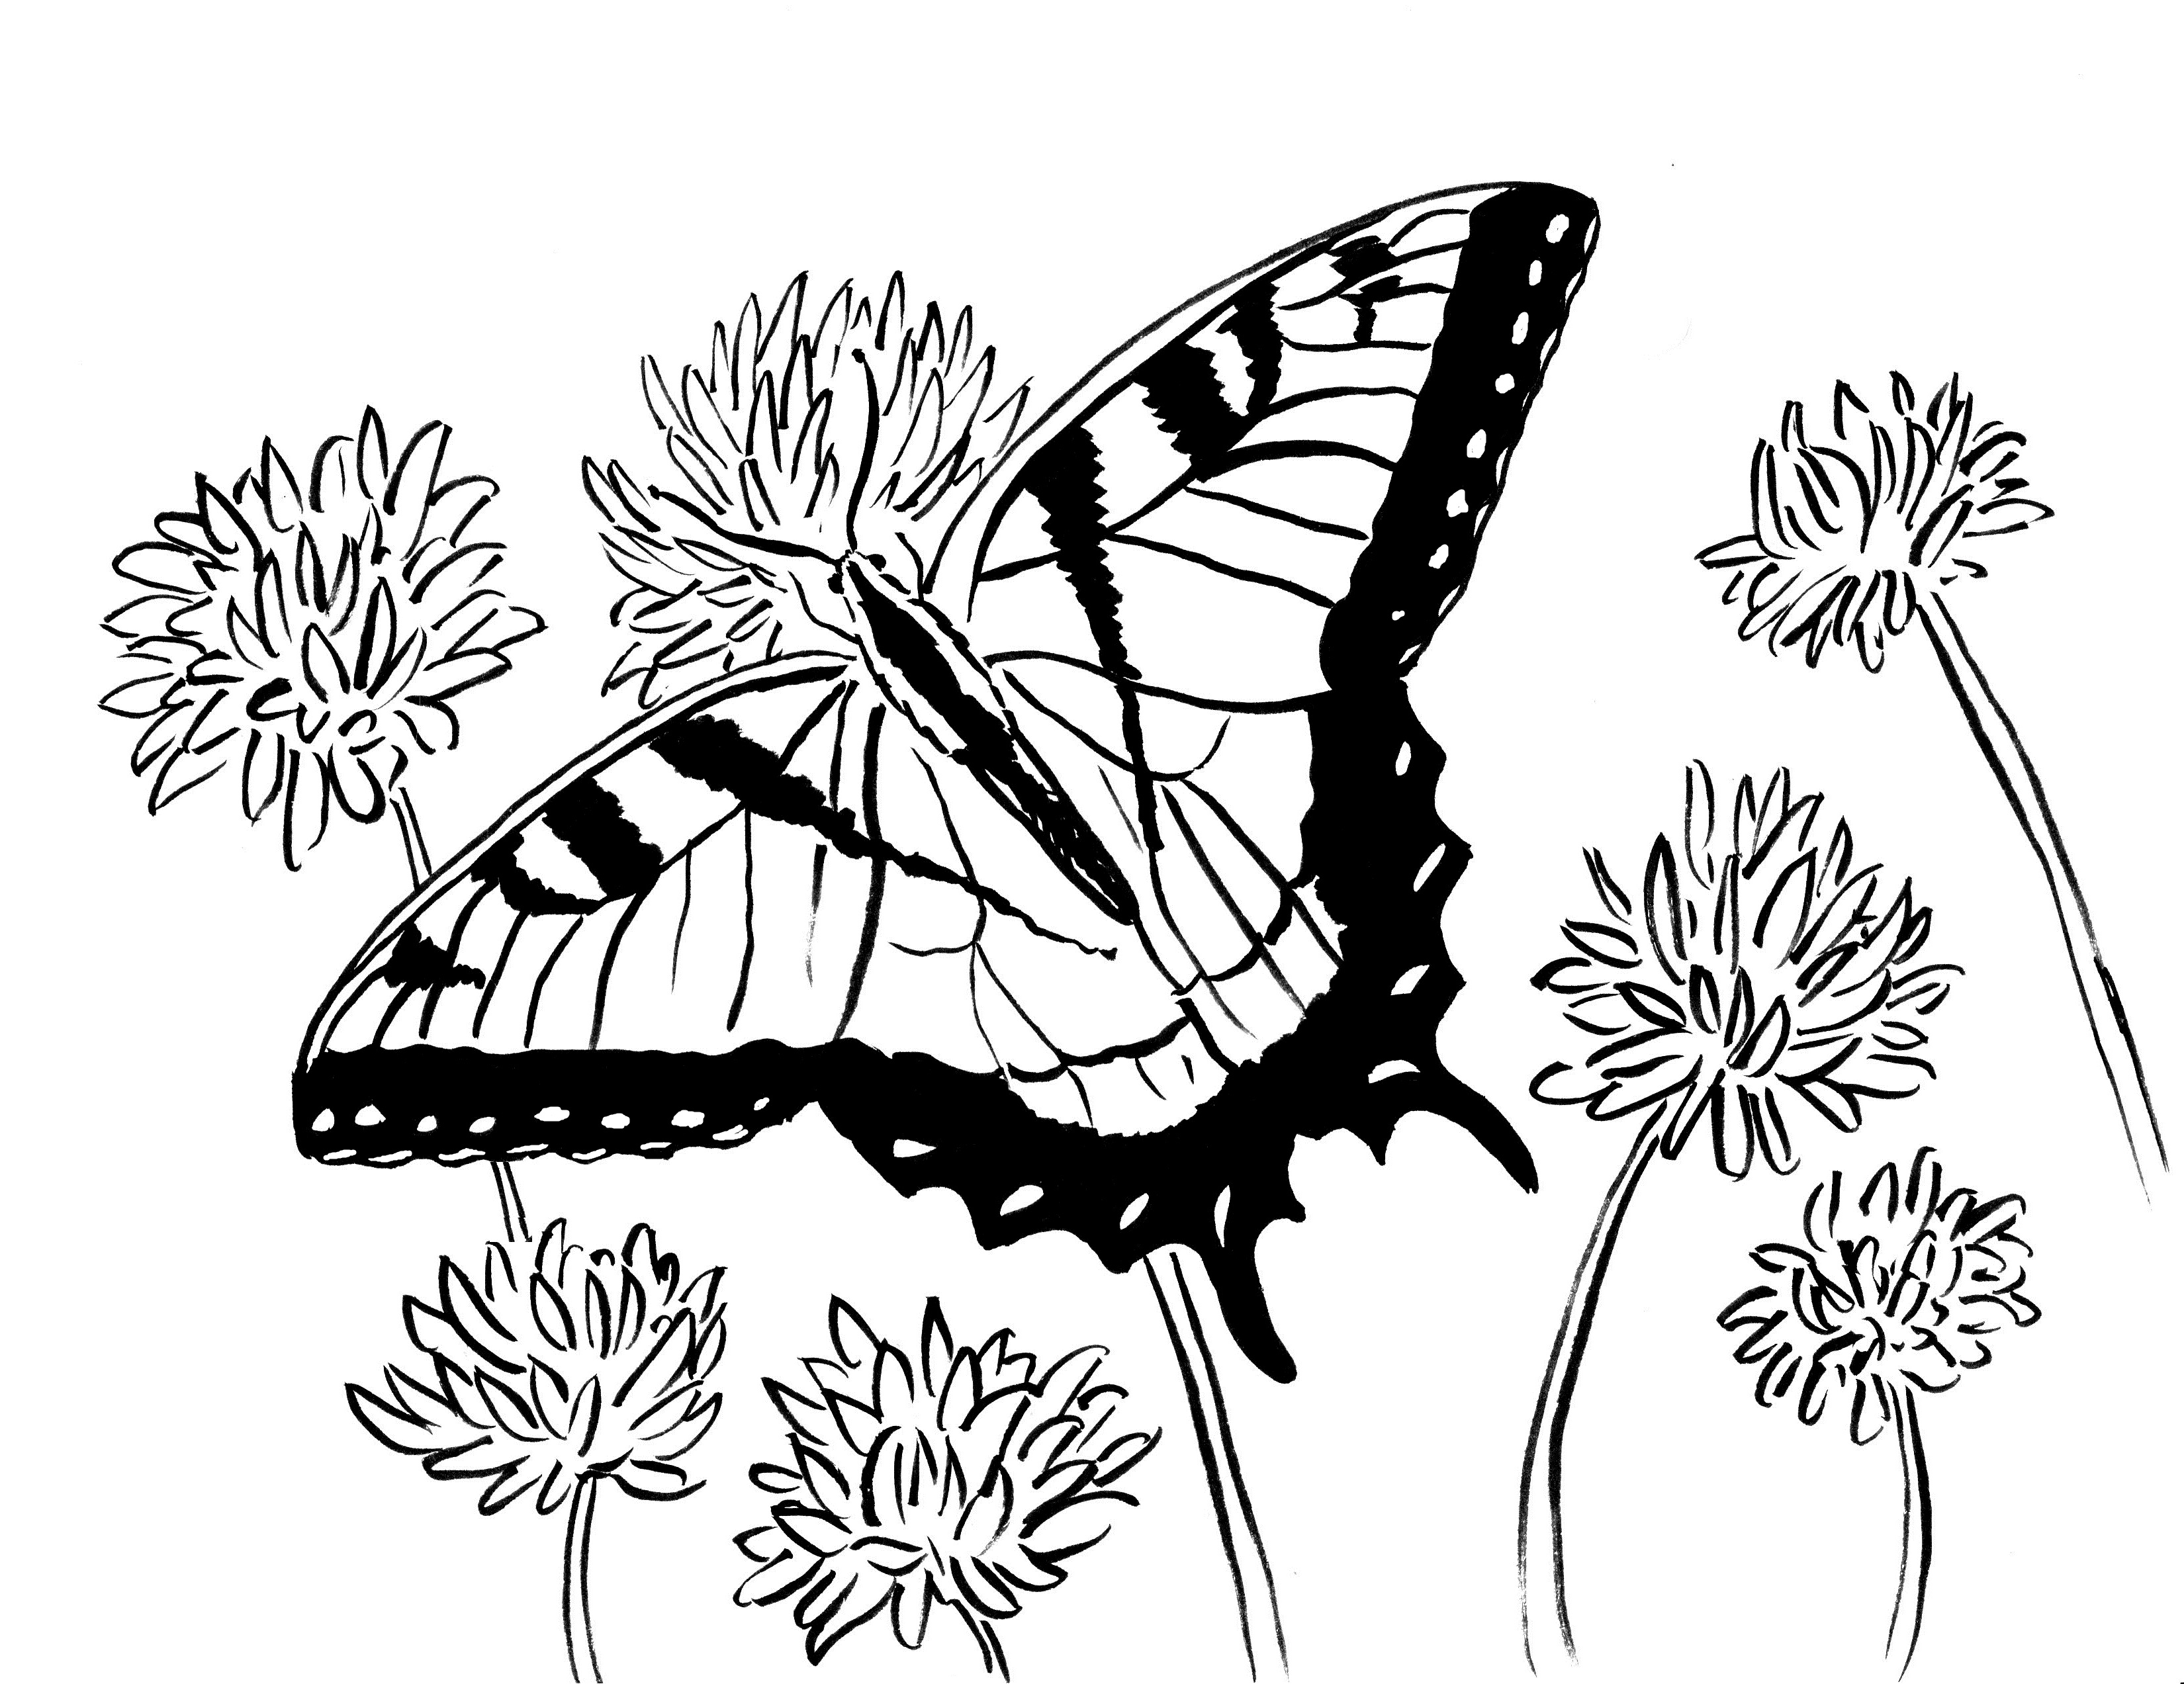 Swallowtail Butterfly Coloring Page - Art Starts for Kids